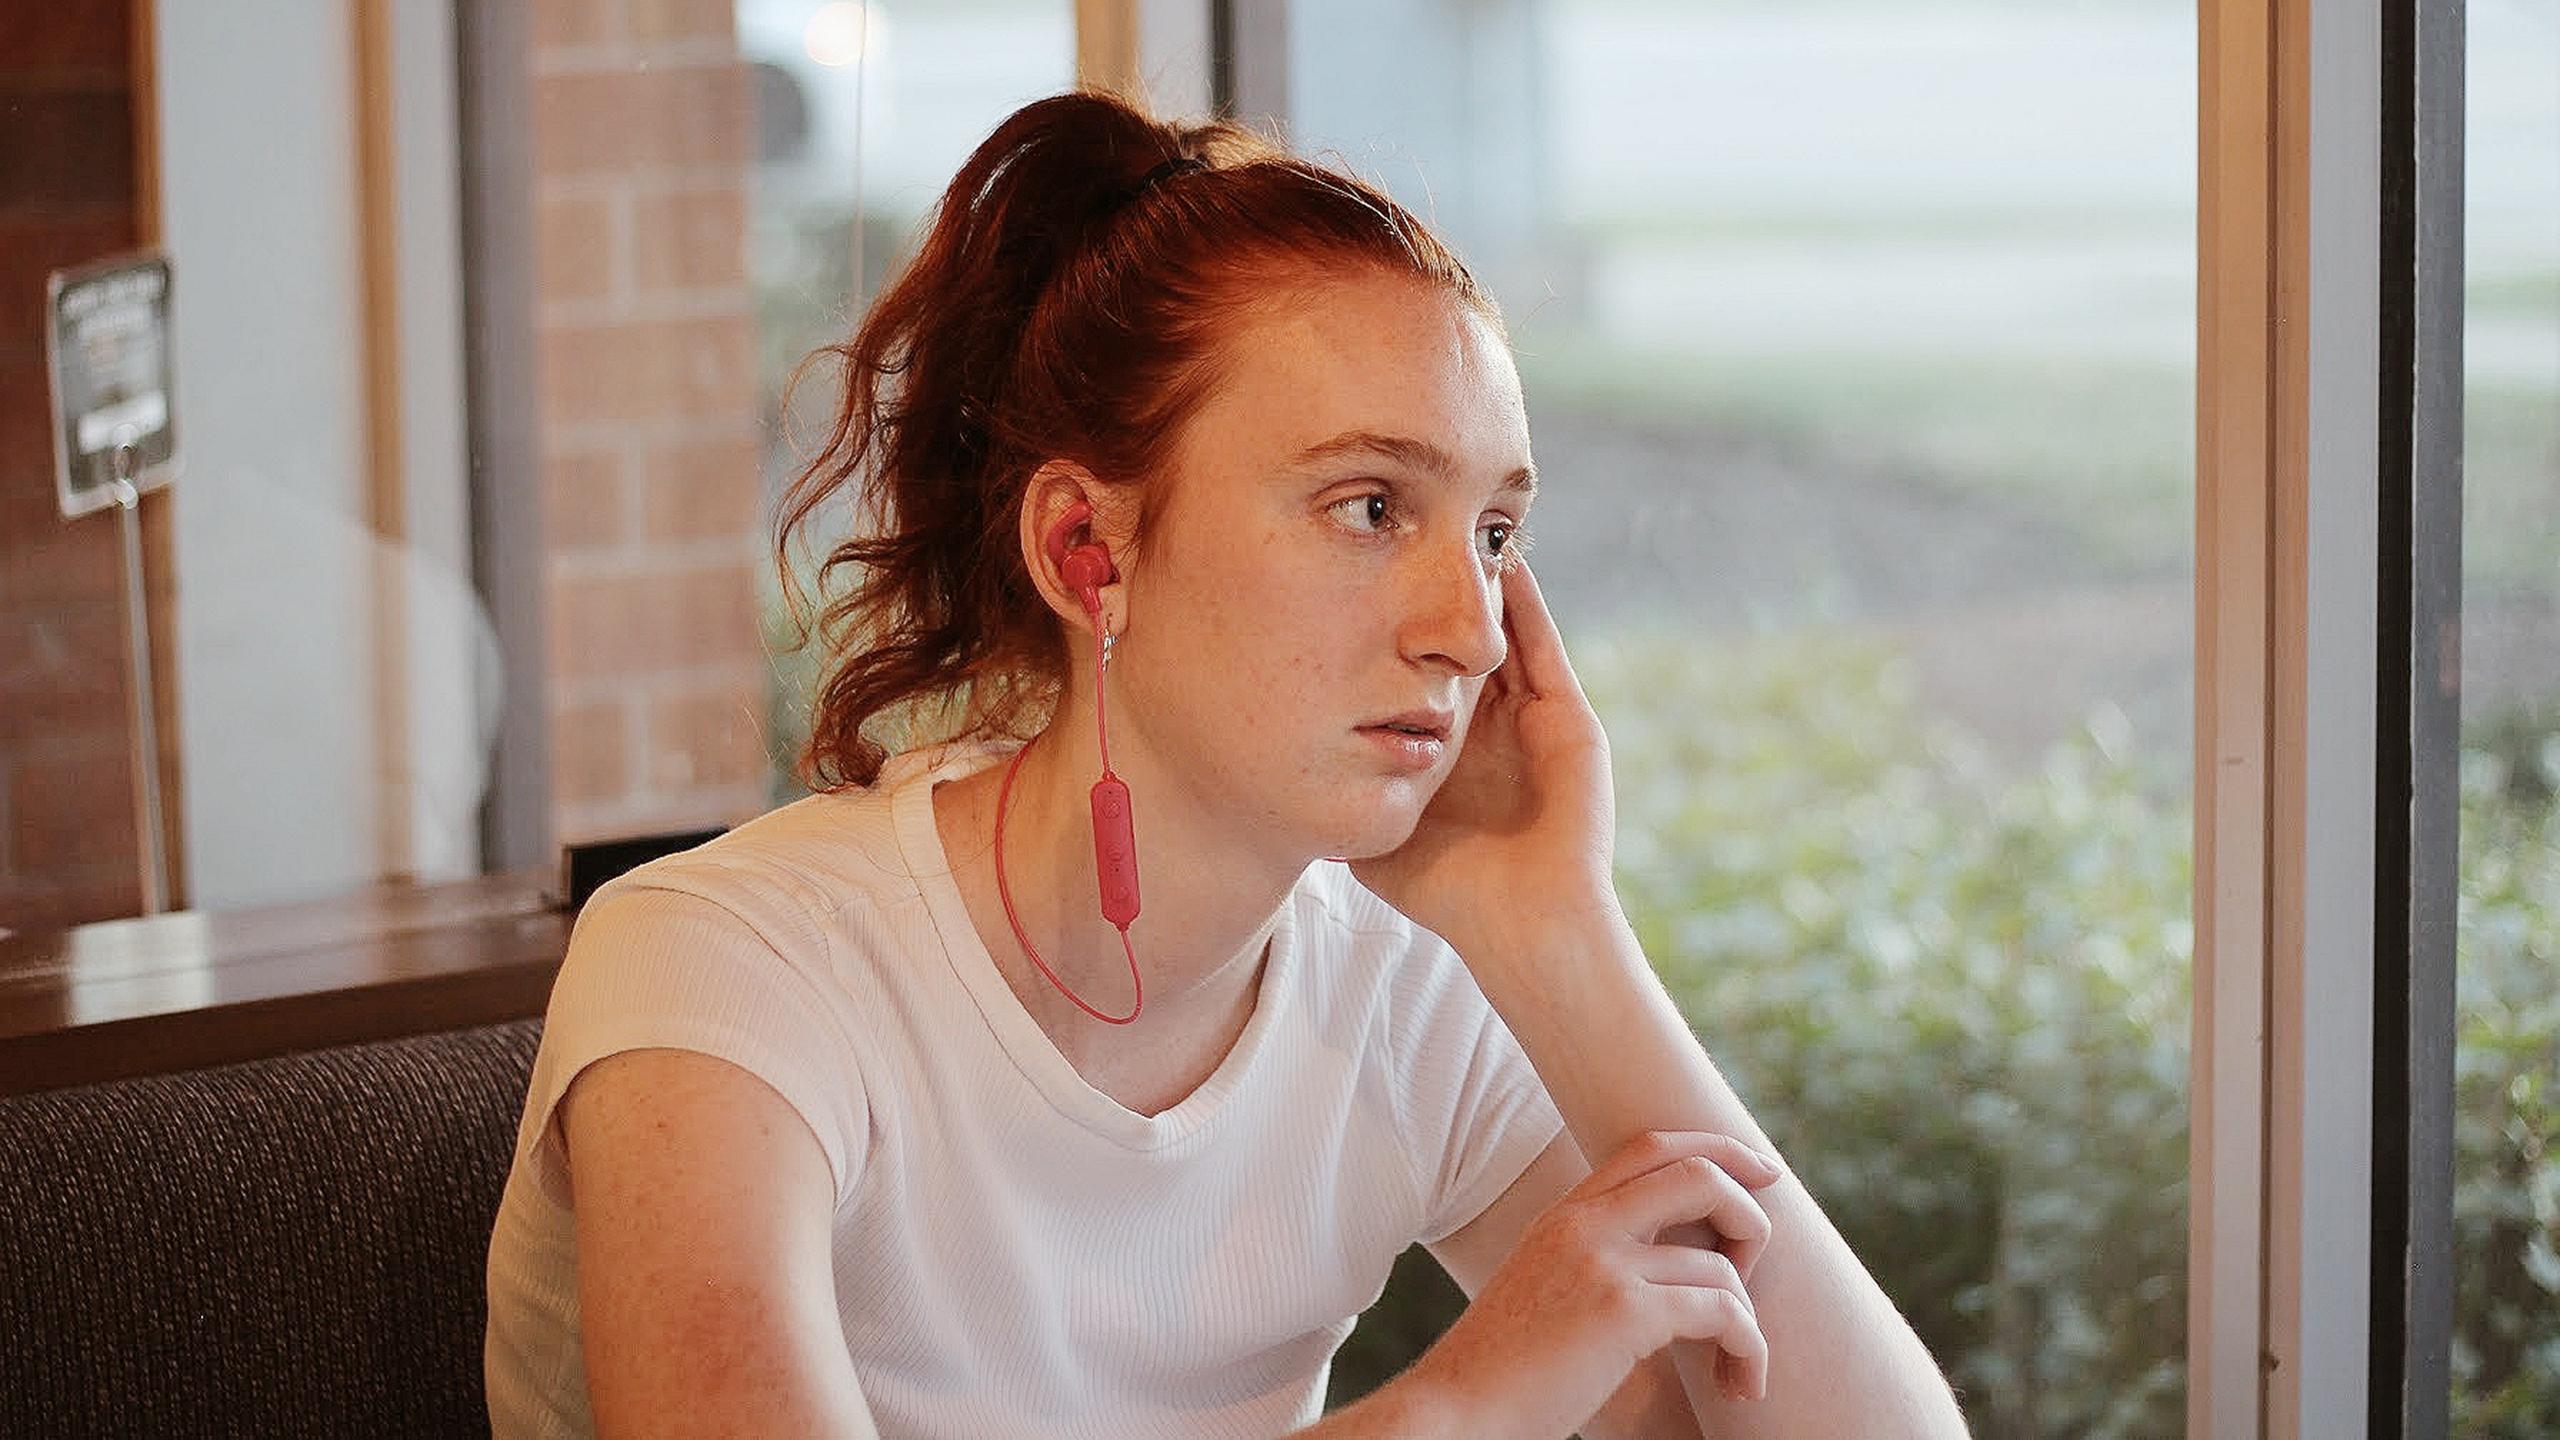 Picture of young woman staring out a window with headphones in.